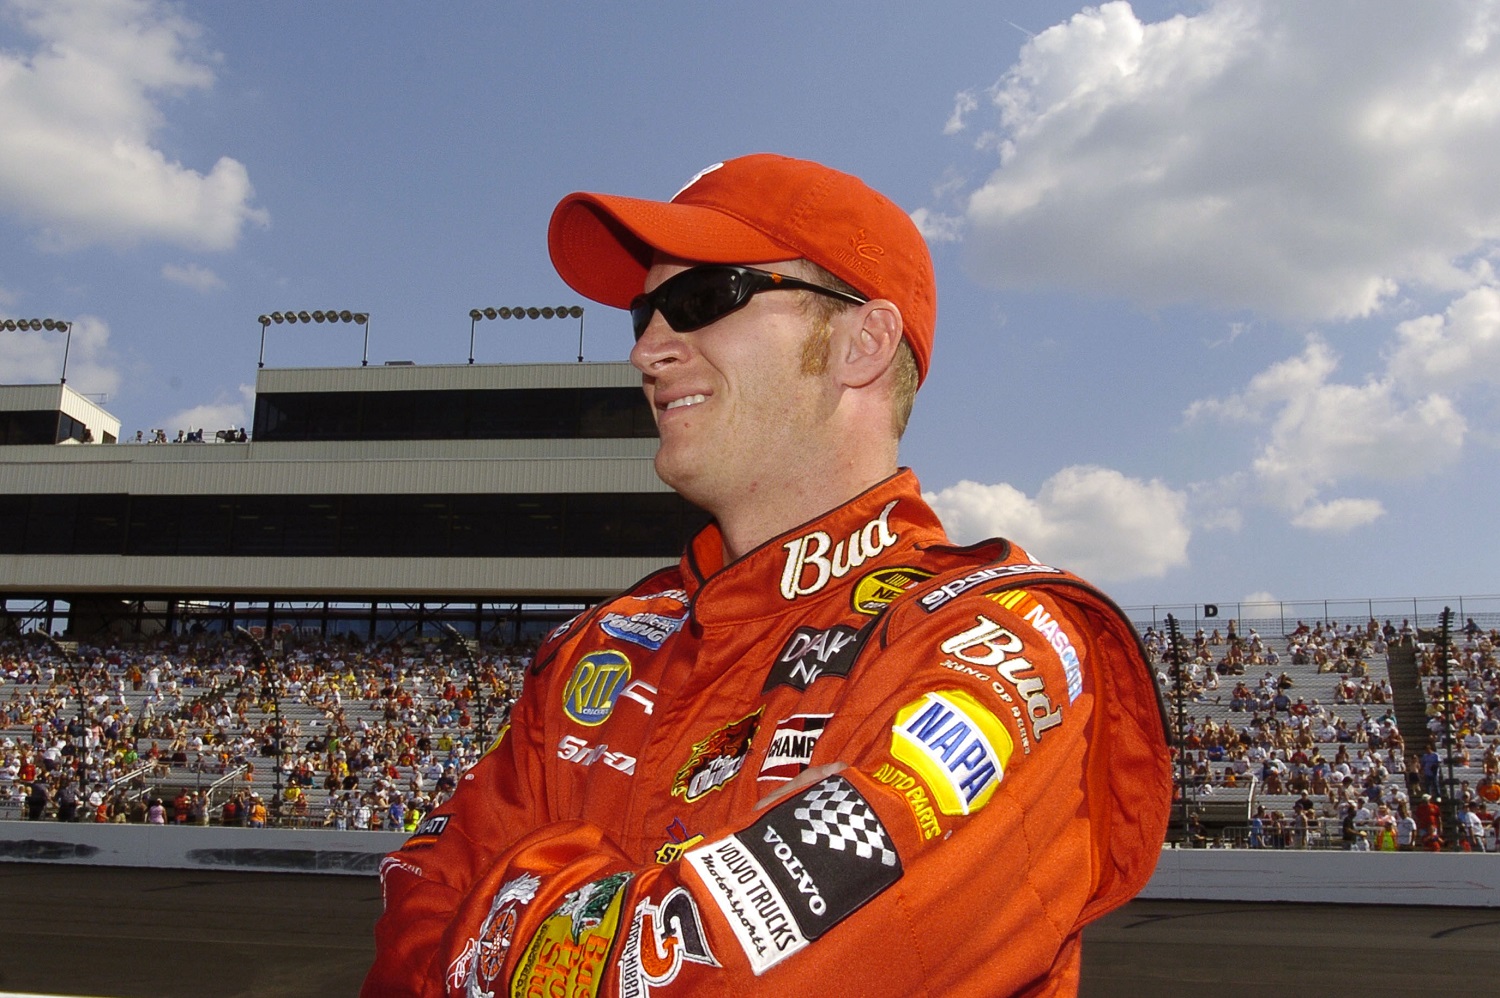 Dale Earnhardt Jr. competes in the NASCAR Nextel Cup Series Chevy American Revolution 400 at Richmond International Raceway on May 14, 2004.